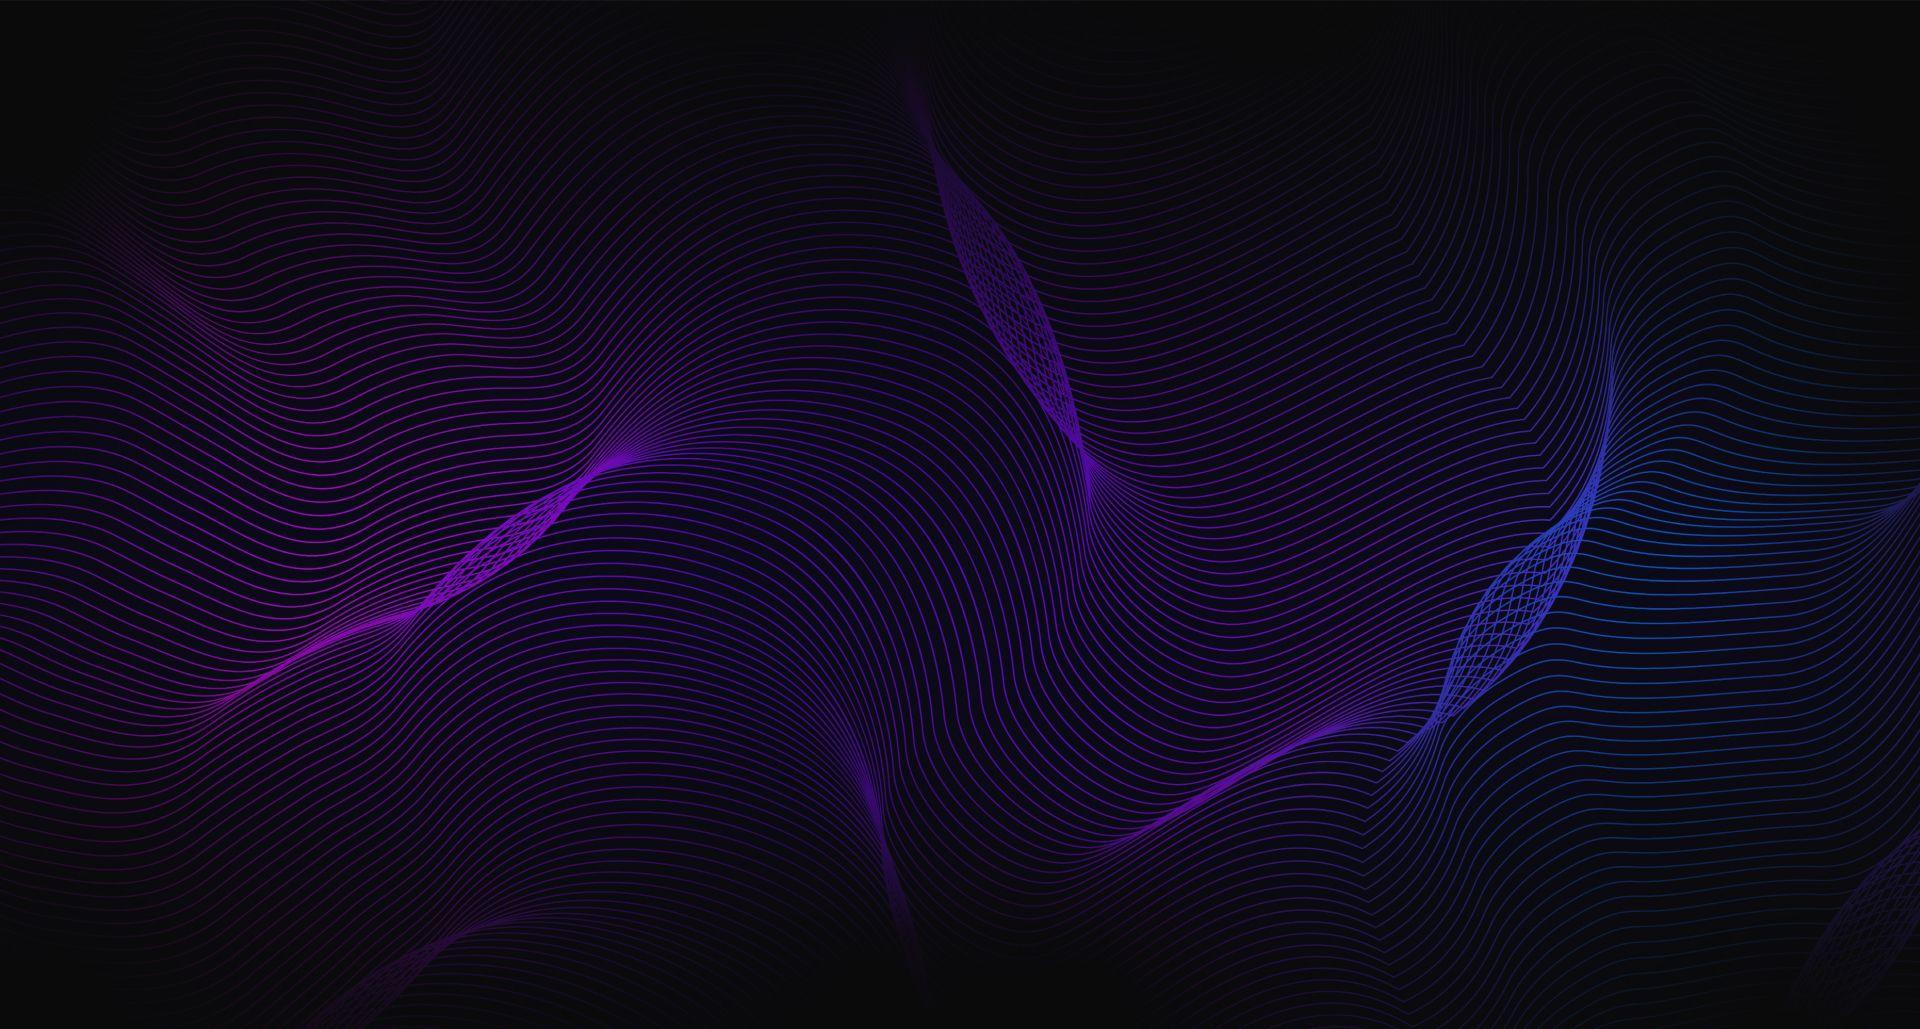 Background image - abstract lines